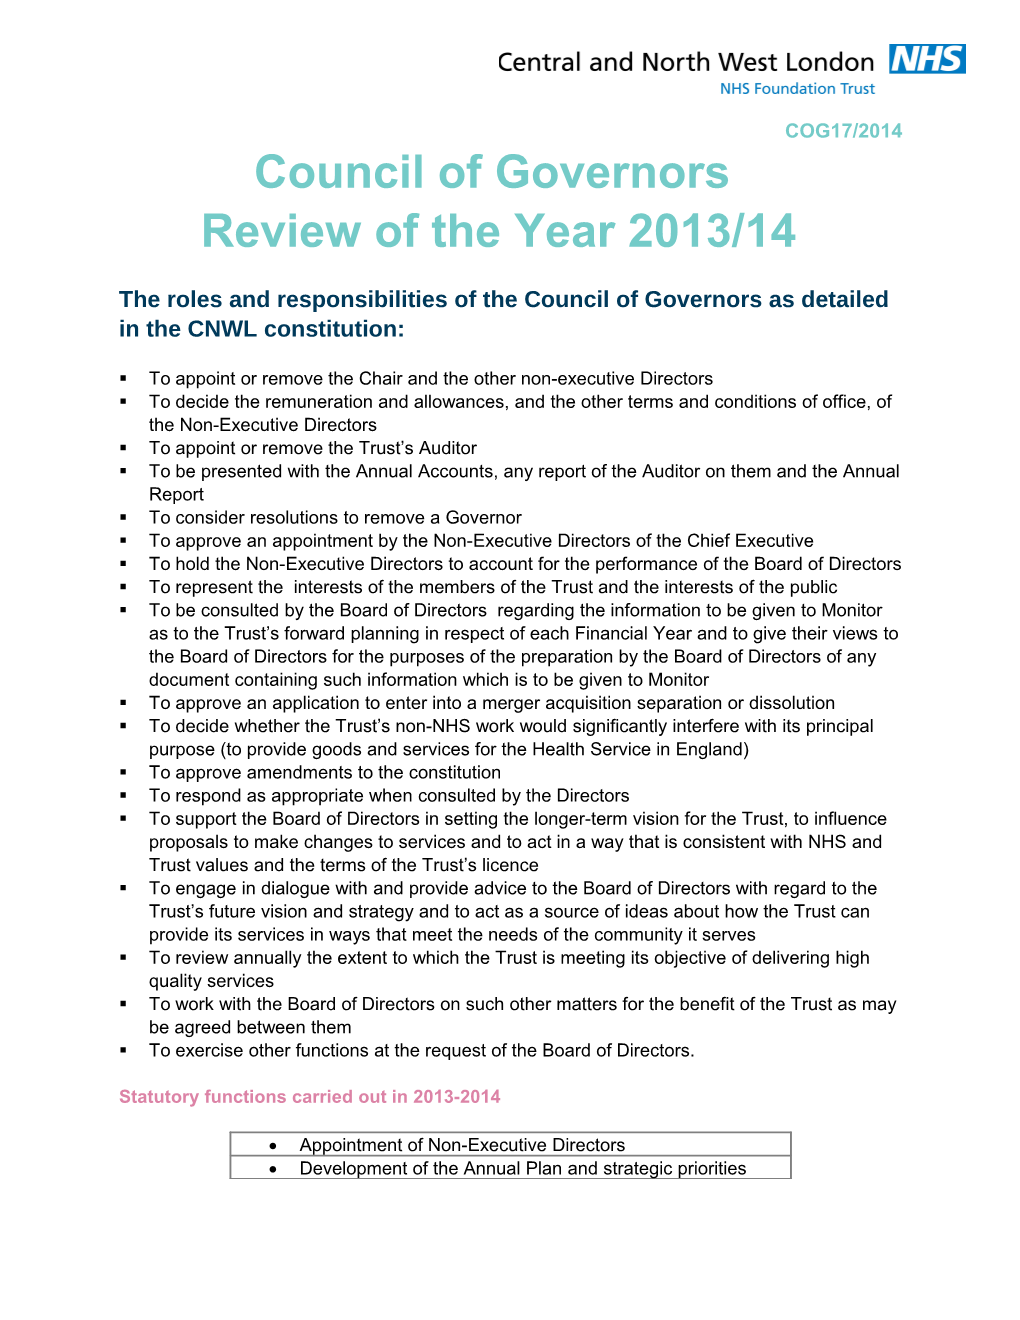 Council of Members Review of the Year 2008/09